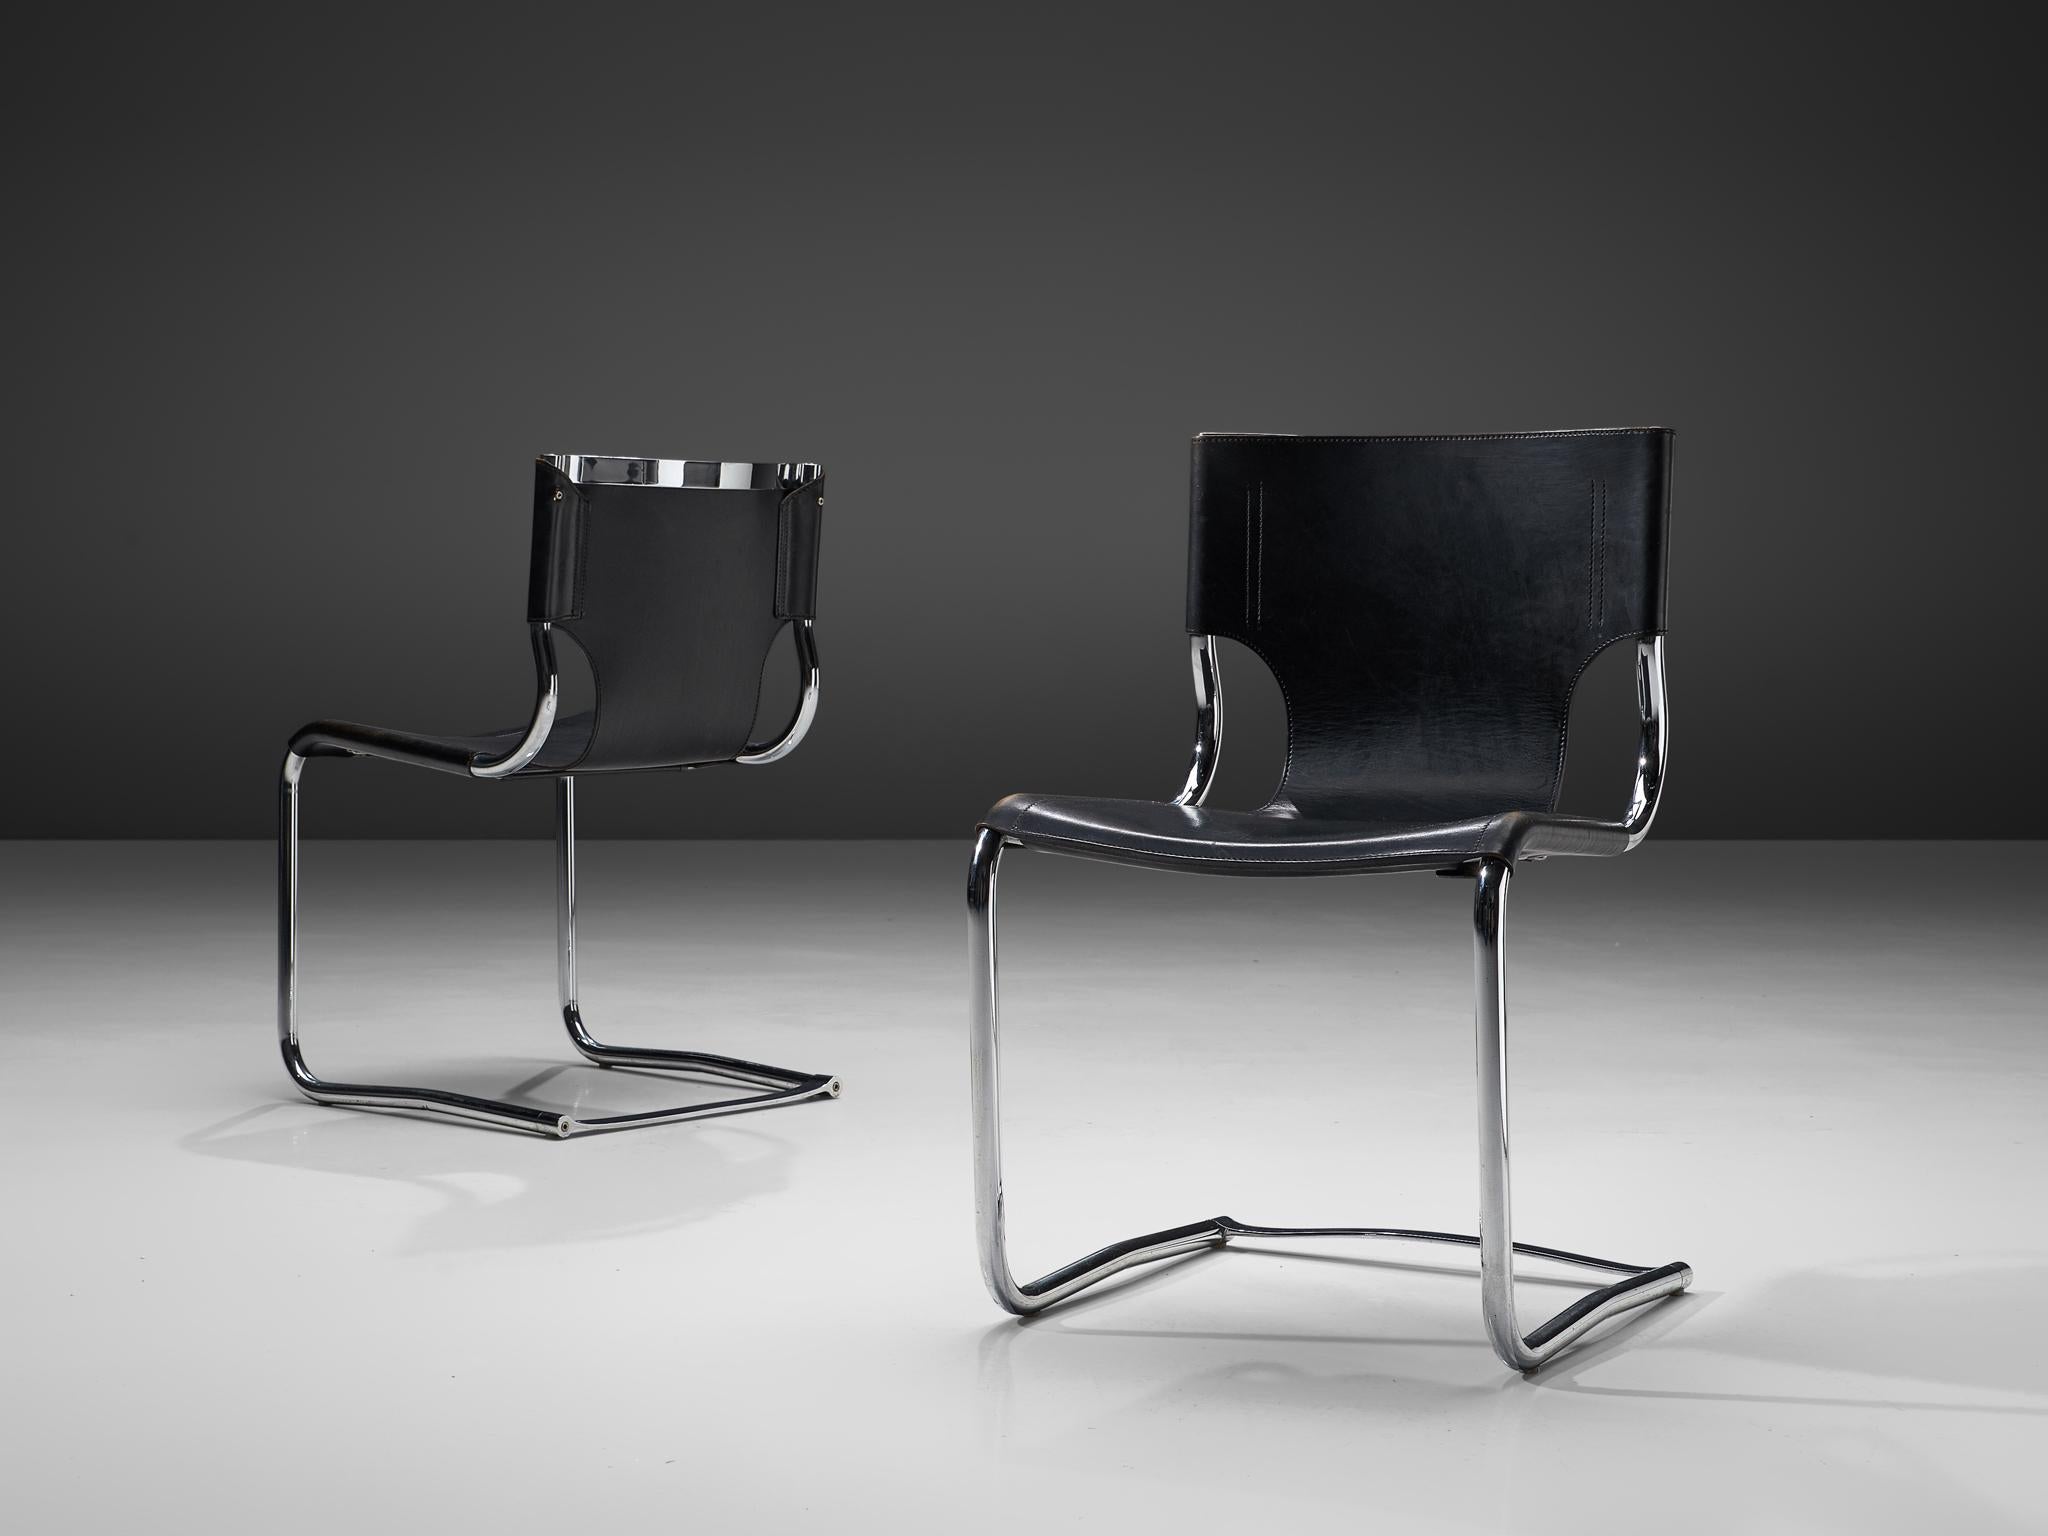 Carlo Bartoli, pair of dining chairs model '920', black leather, steel, Italy, designed in 1971. 

This elegant pair of cantilevered tubular frame chairs is executed with the finest black leather that is used as a shell for both seat and back. The